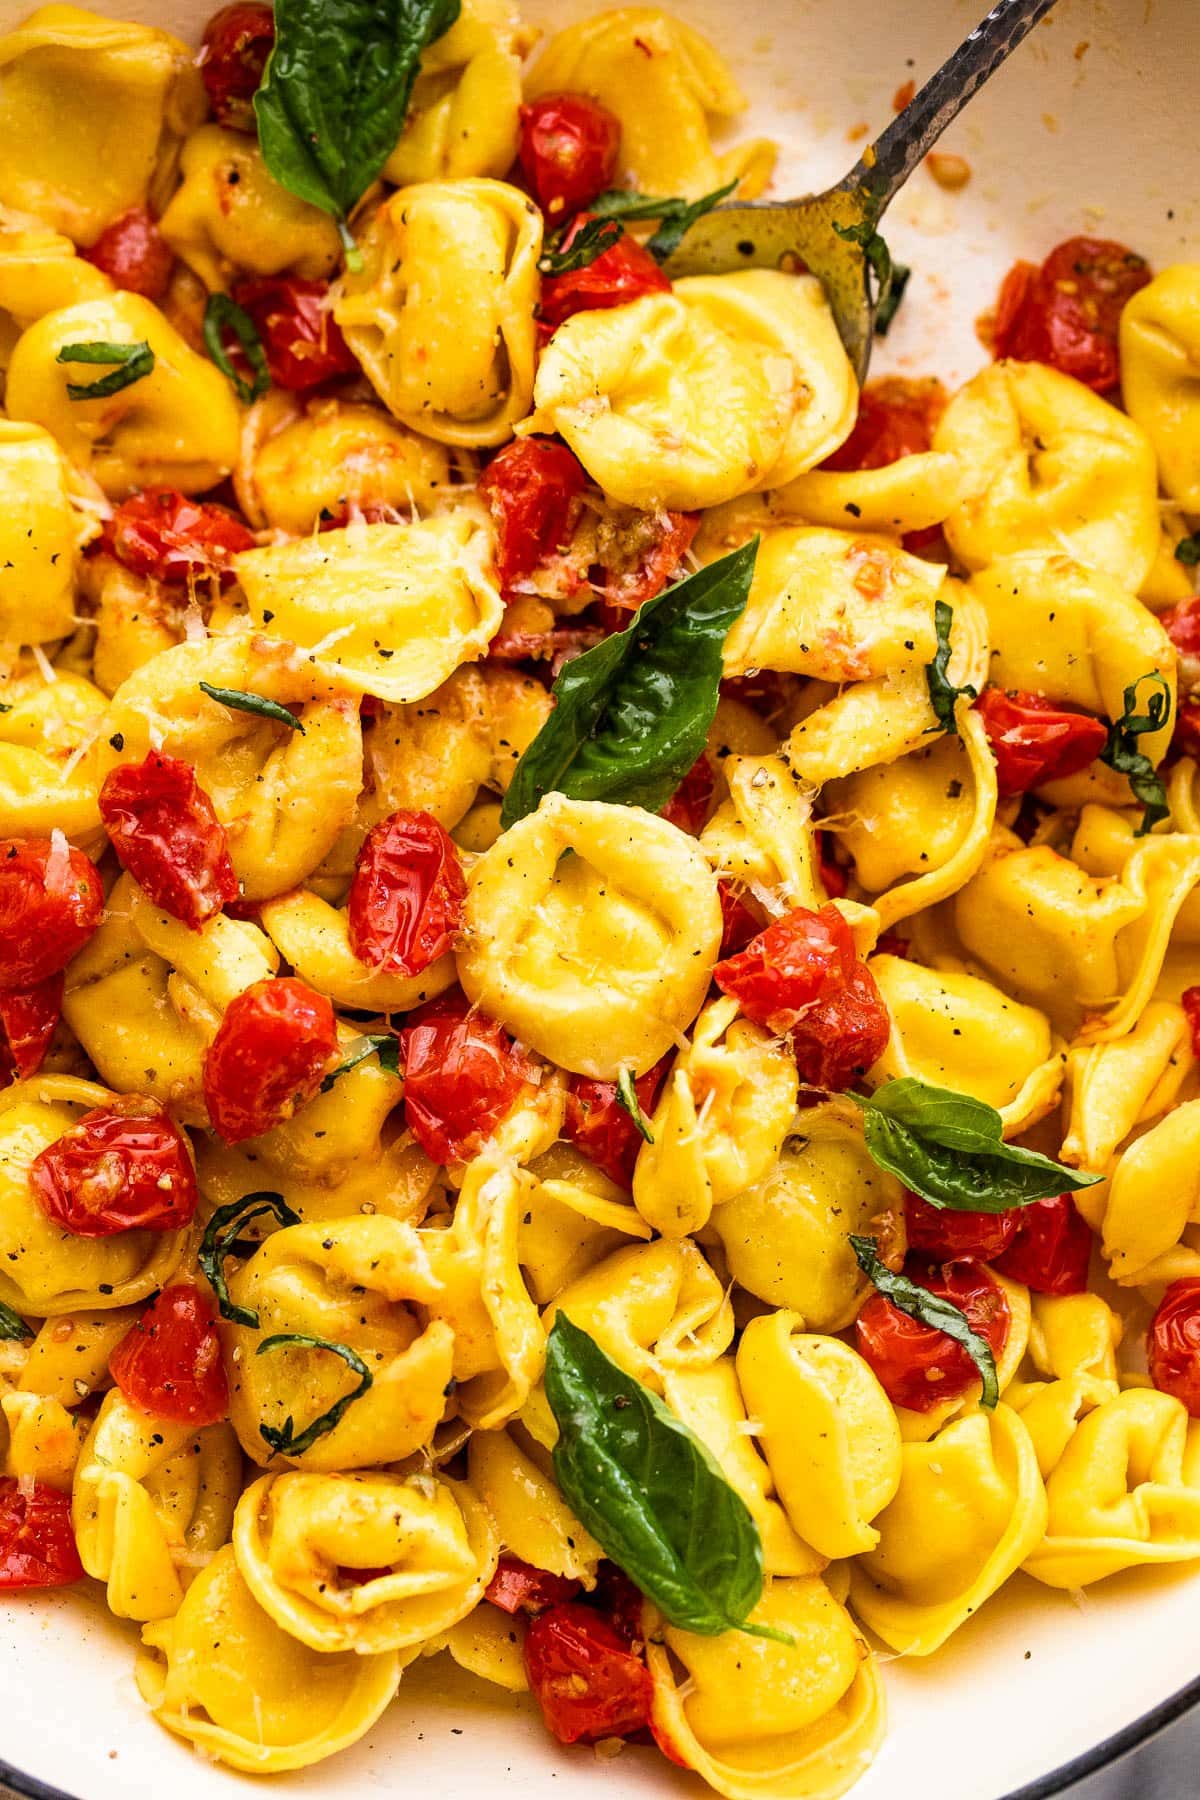 Cheese Tortellini with Roasted Tomatoes served in a large pasta bowl.